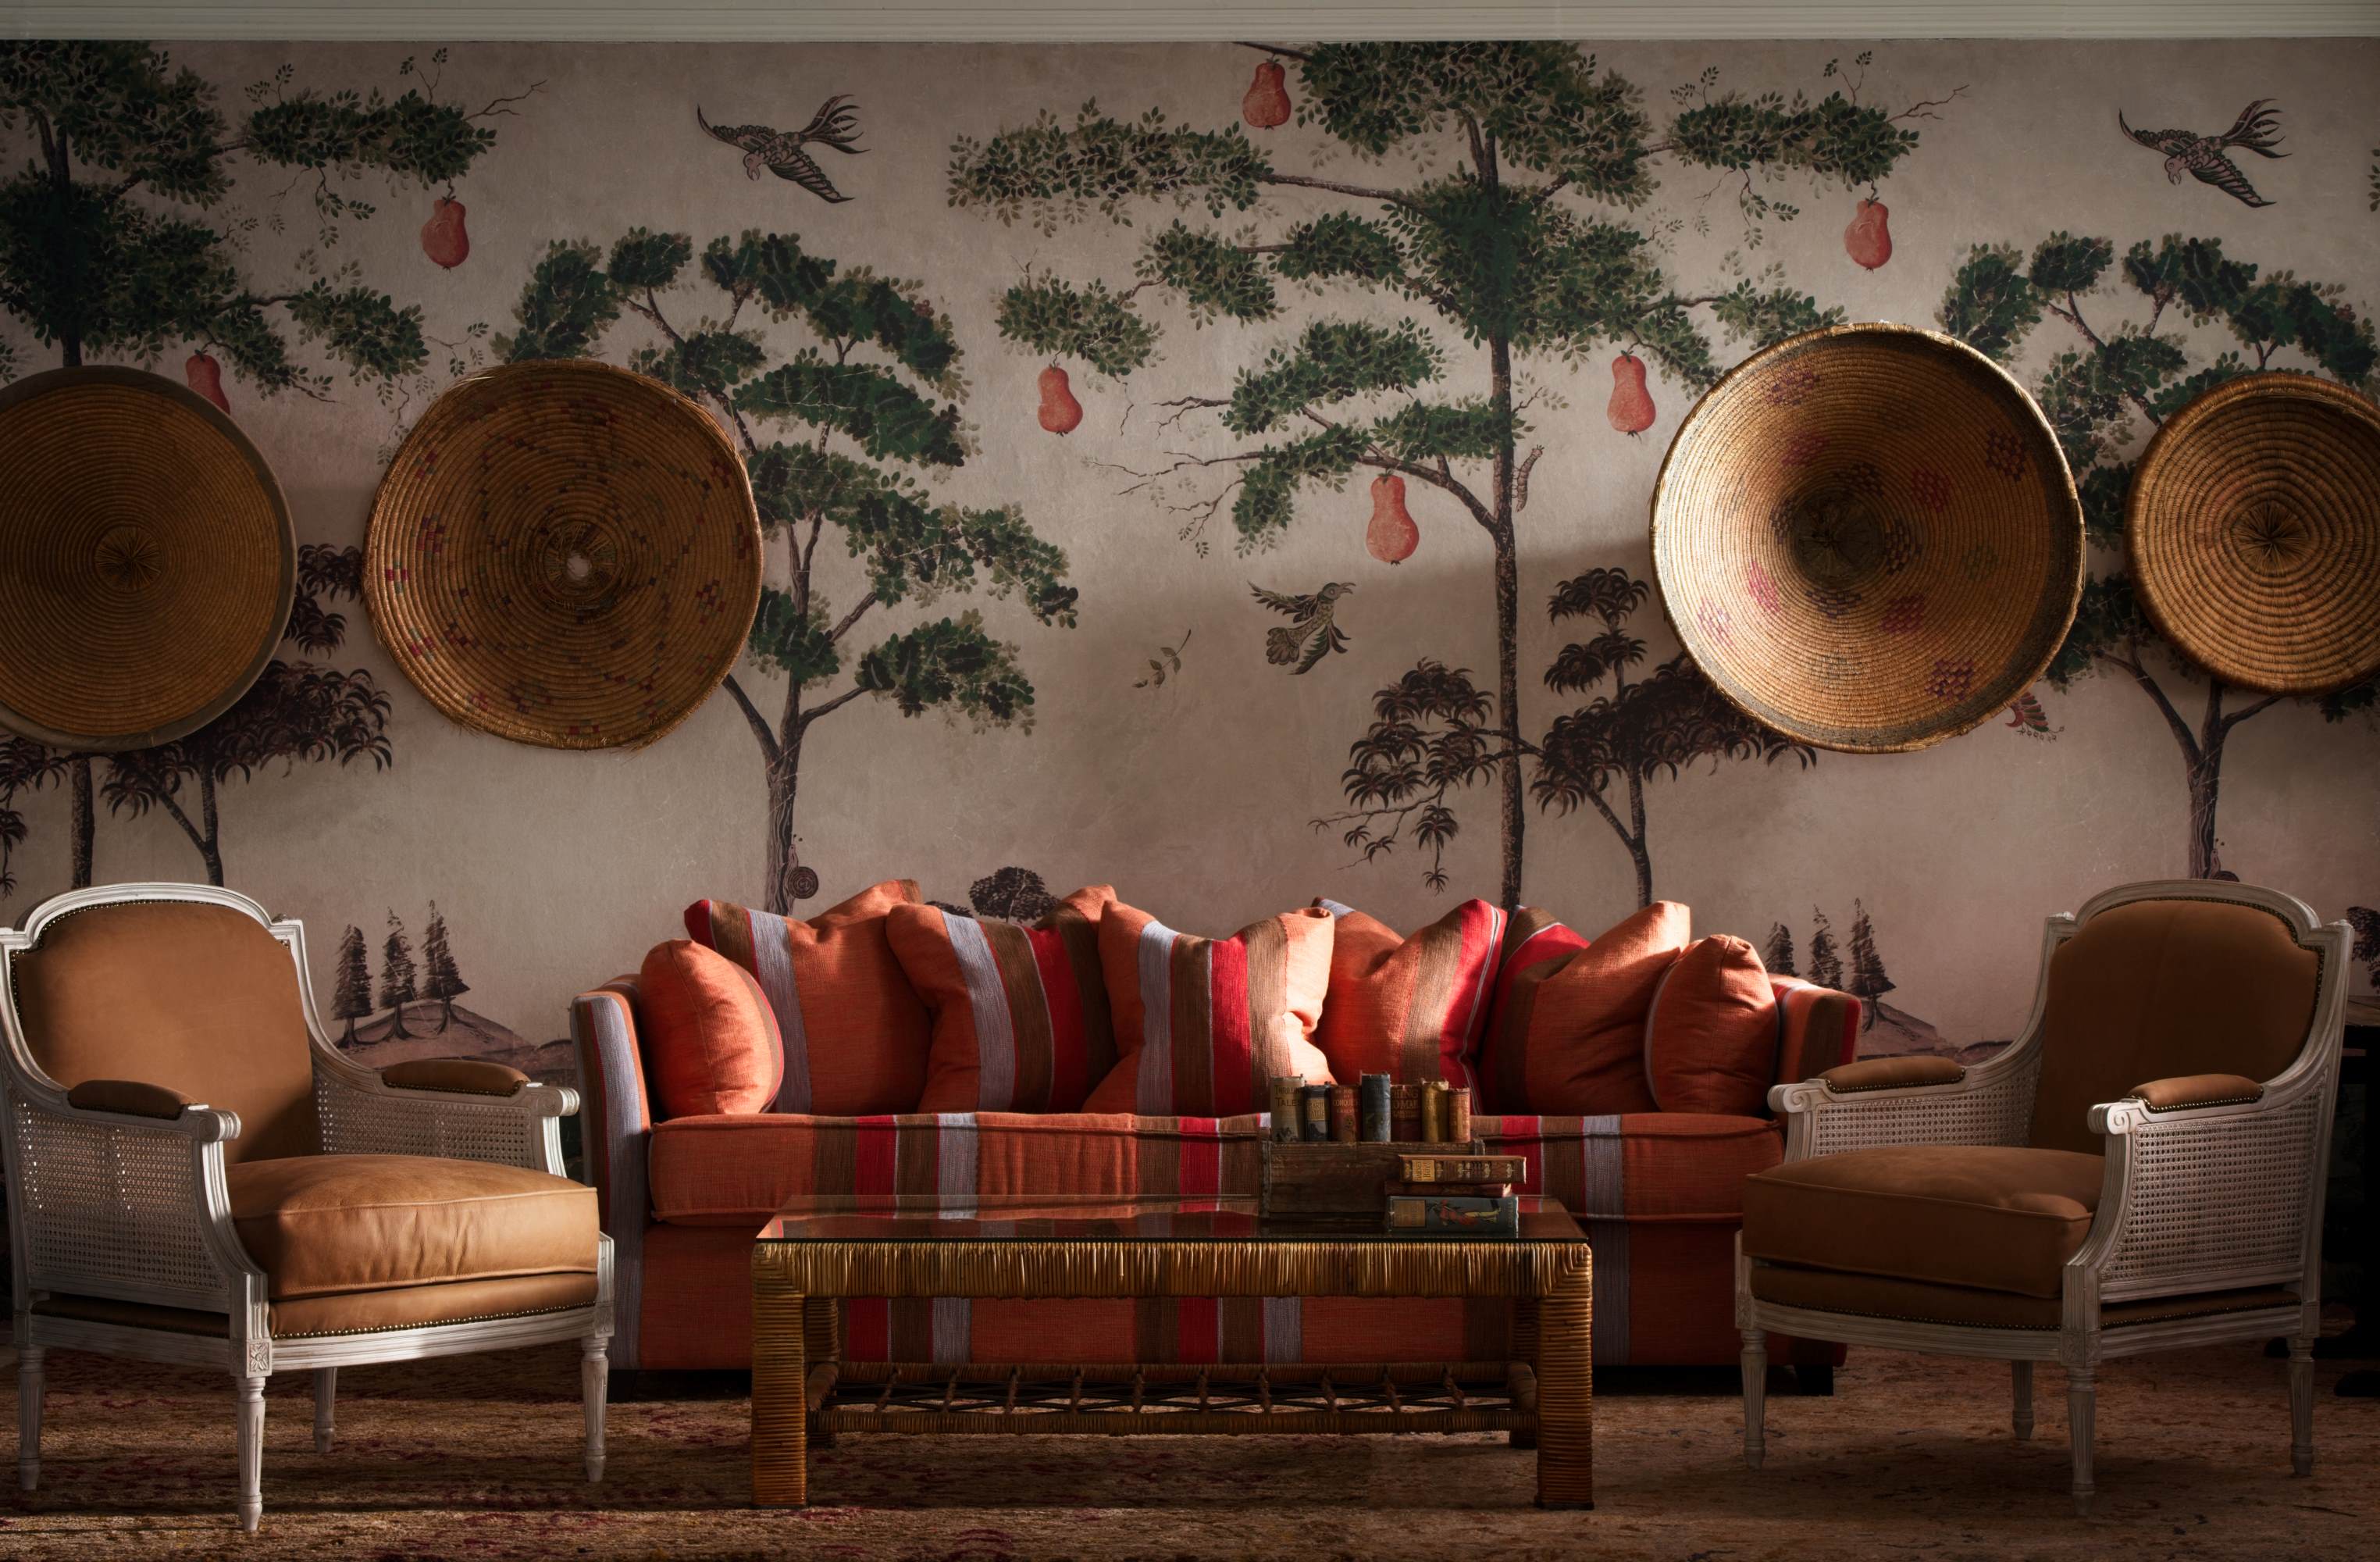 Mythical Land is among the wallpaper designs being launched by Andrew Martin at the London Design Festival